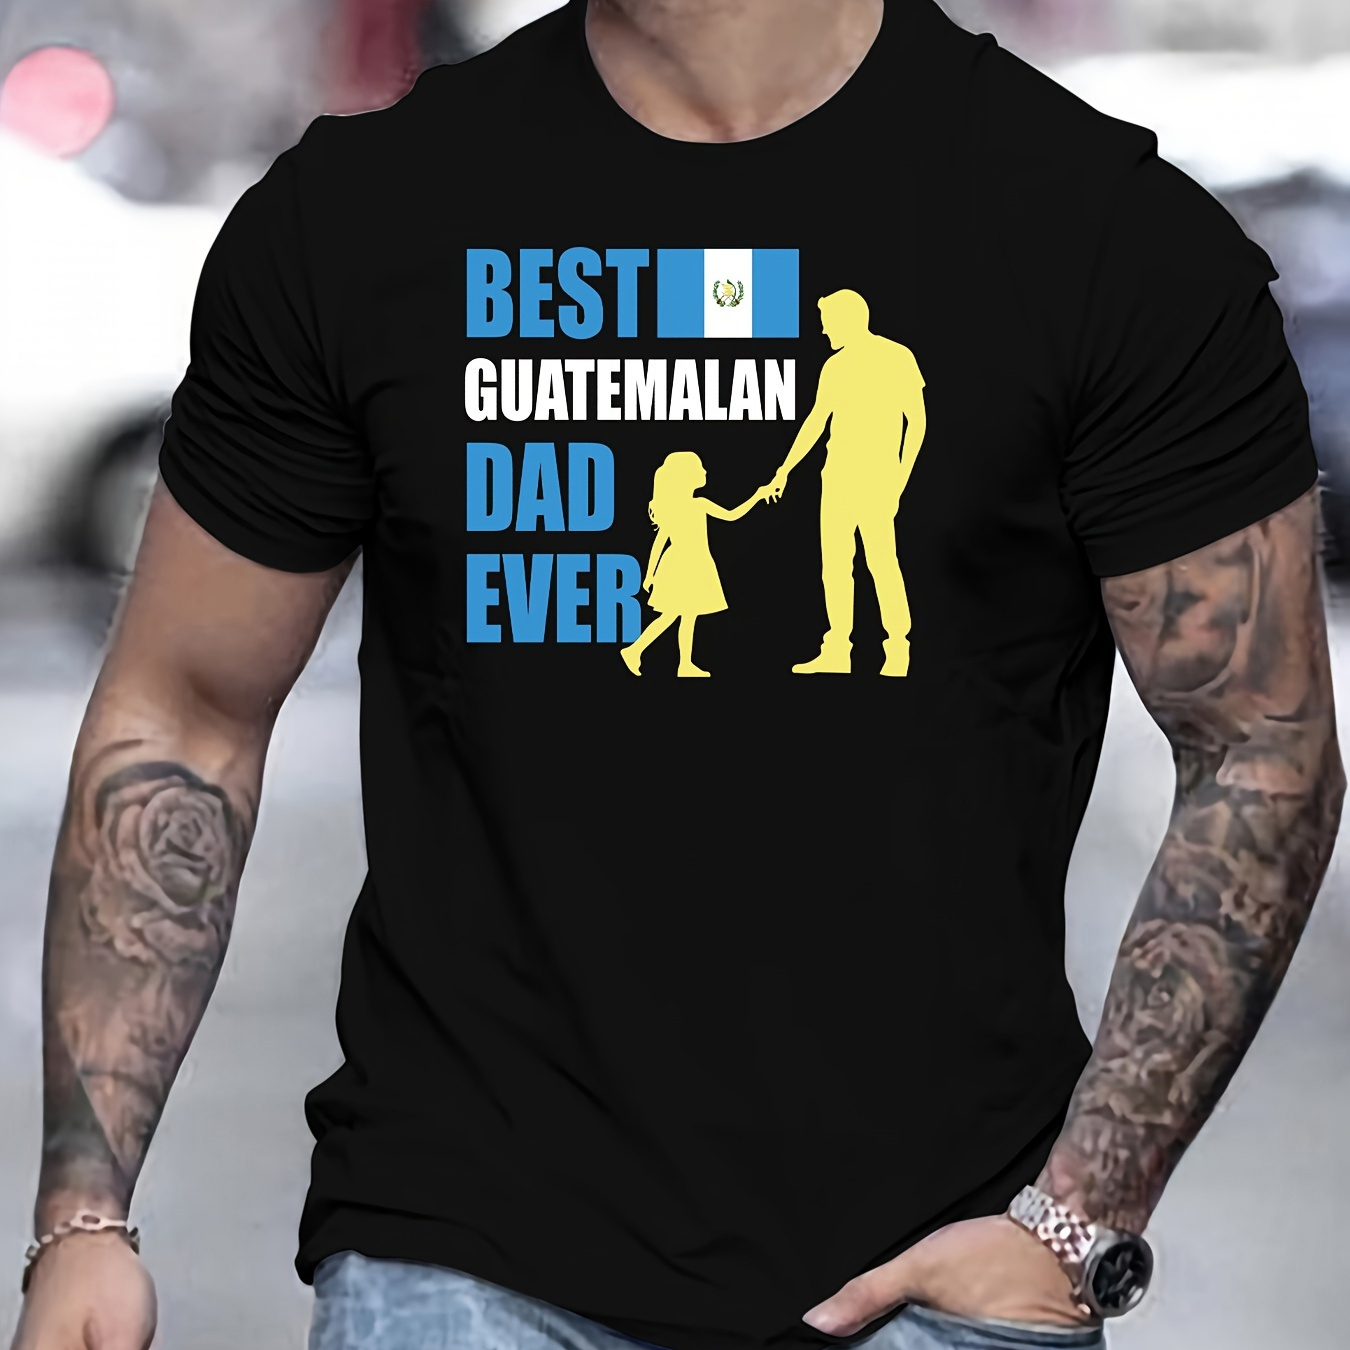 

Best Guatemalan Dad Ever Print Short Sleeve Tees For Men, Casual Crew Neck T-shirt, Comfortable Breathable T-shirt